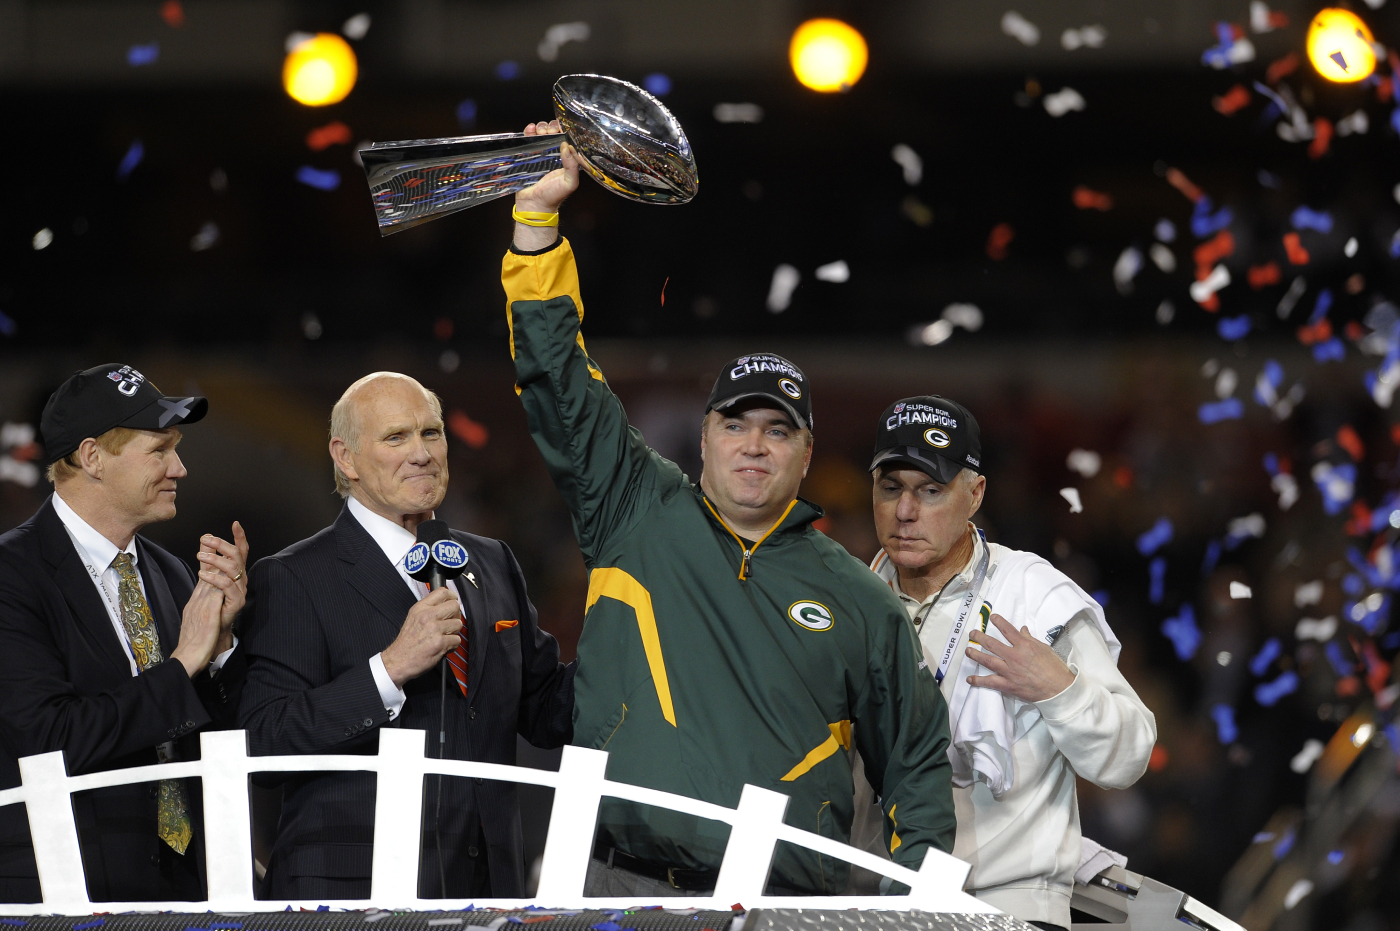 When Aaron Rodgers and the Green Bay Packers won the Super Bowl, Mike McCarthy's best motivational exercise led to the win.